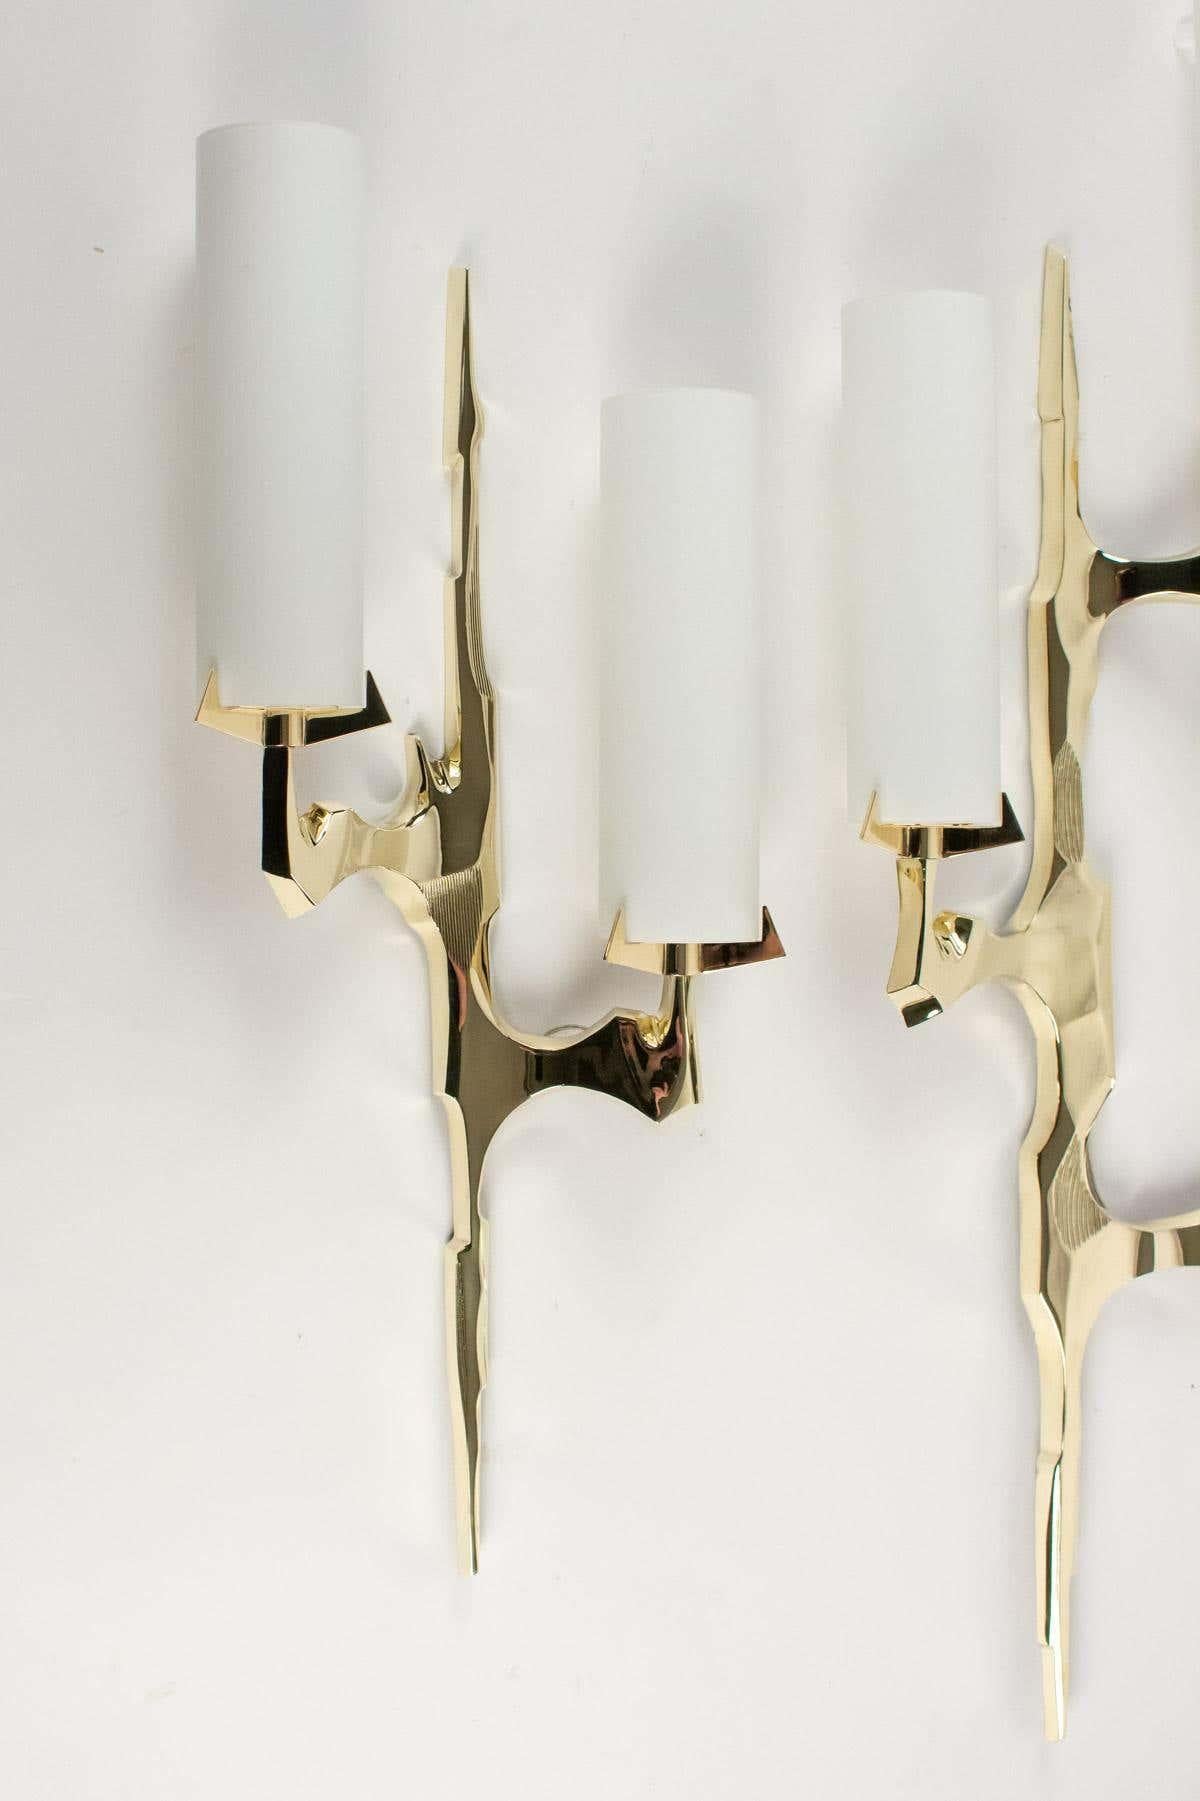 The wall lights are in gilded bronze inspired by tree branches.
The set consists of 2 wall lights of different sizes.
The tallest wall lamp has three bulbs with cylindrical opaline glass shades. Measures: H 29.93